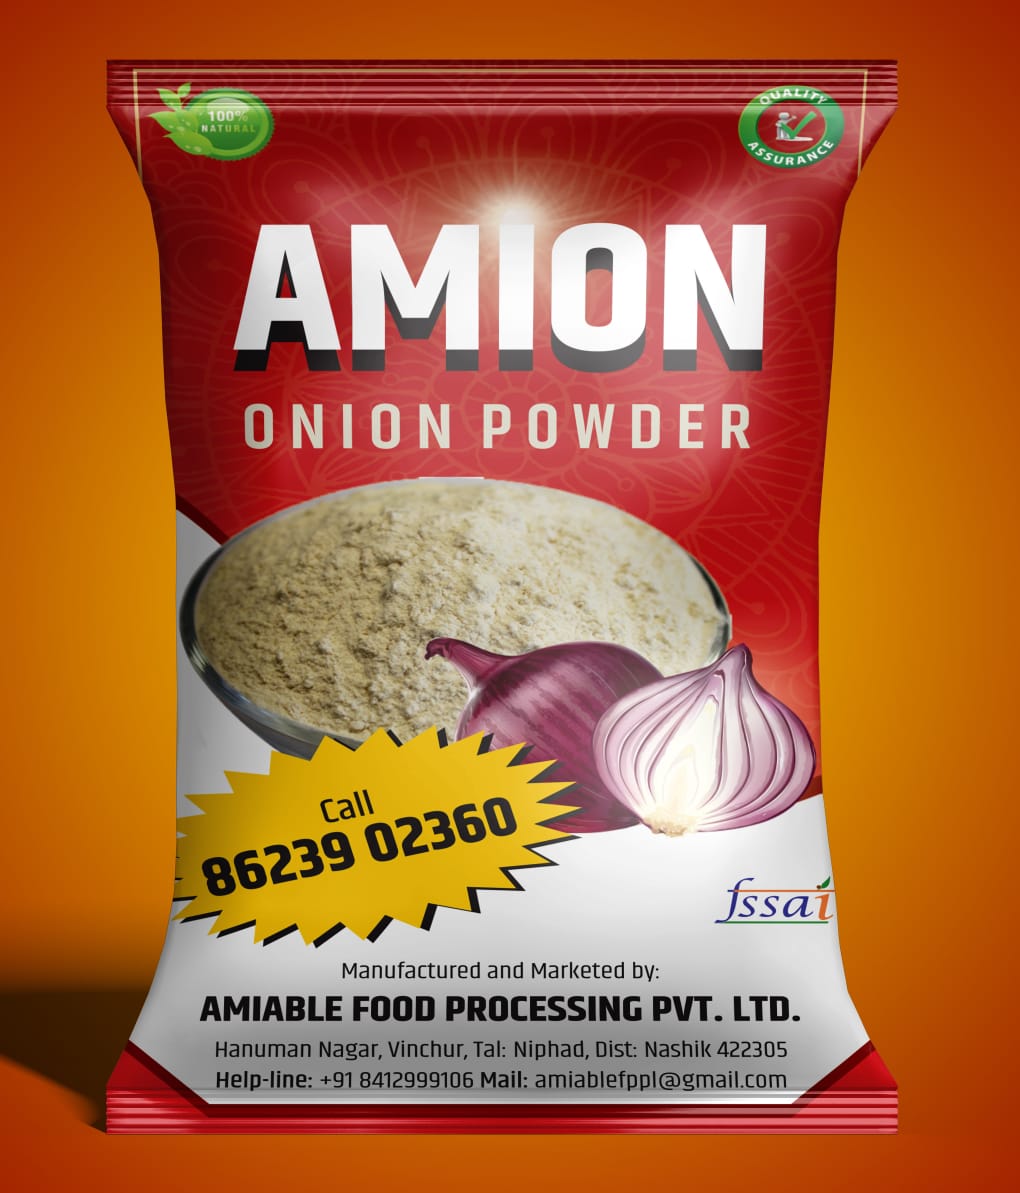 AMION (ONION POWDER) from Amiable Food Processing Pvt. Ltd.